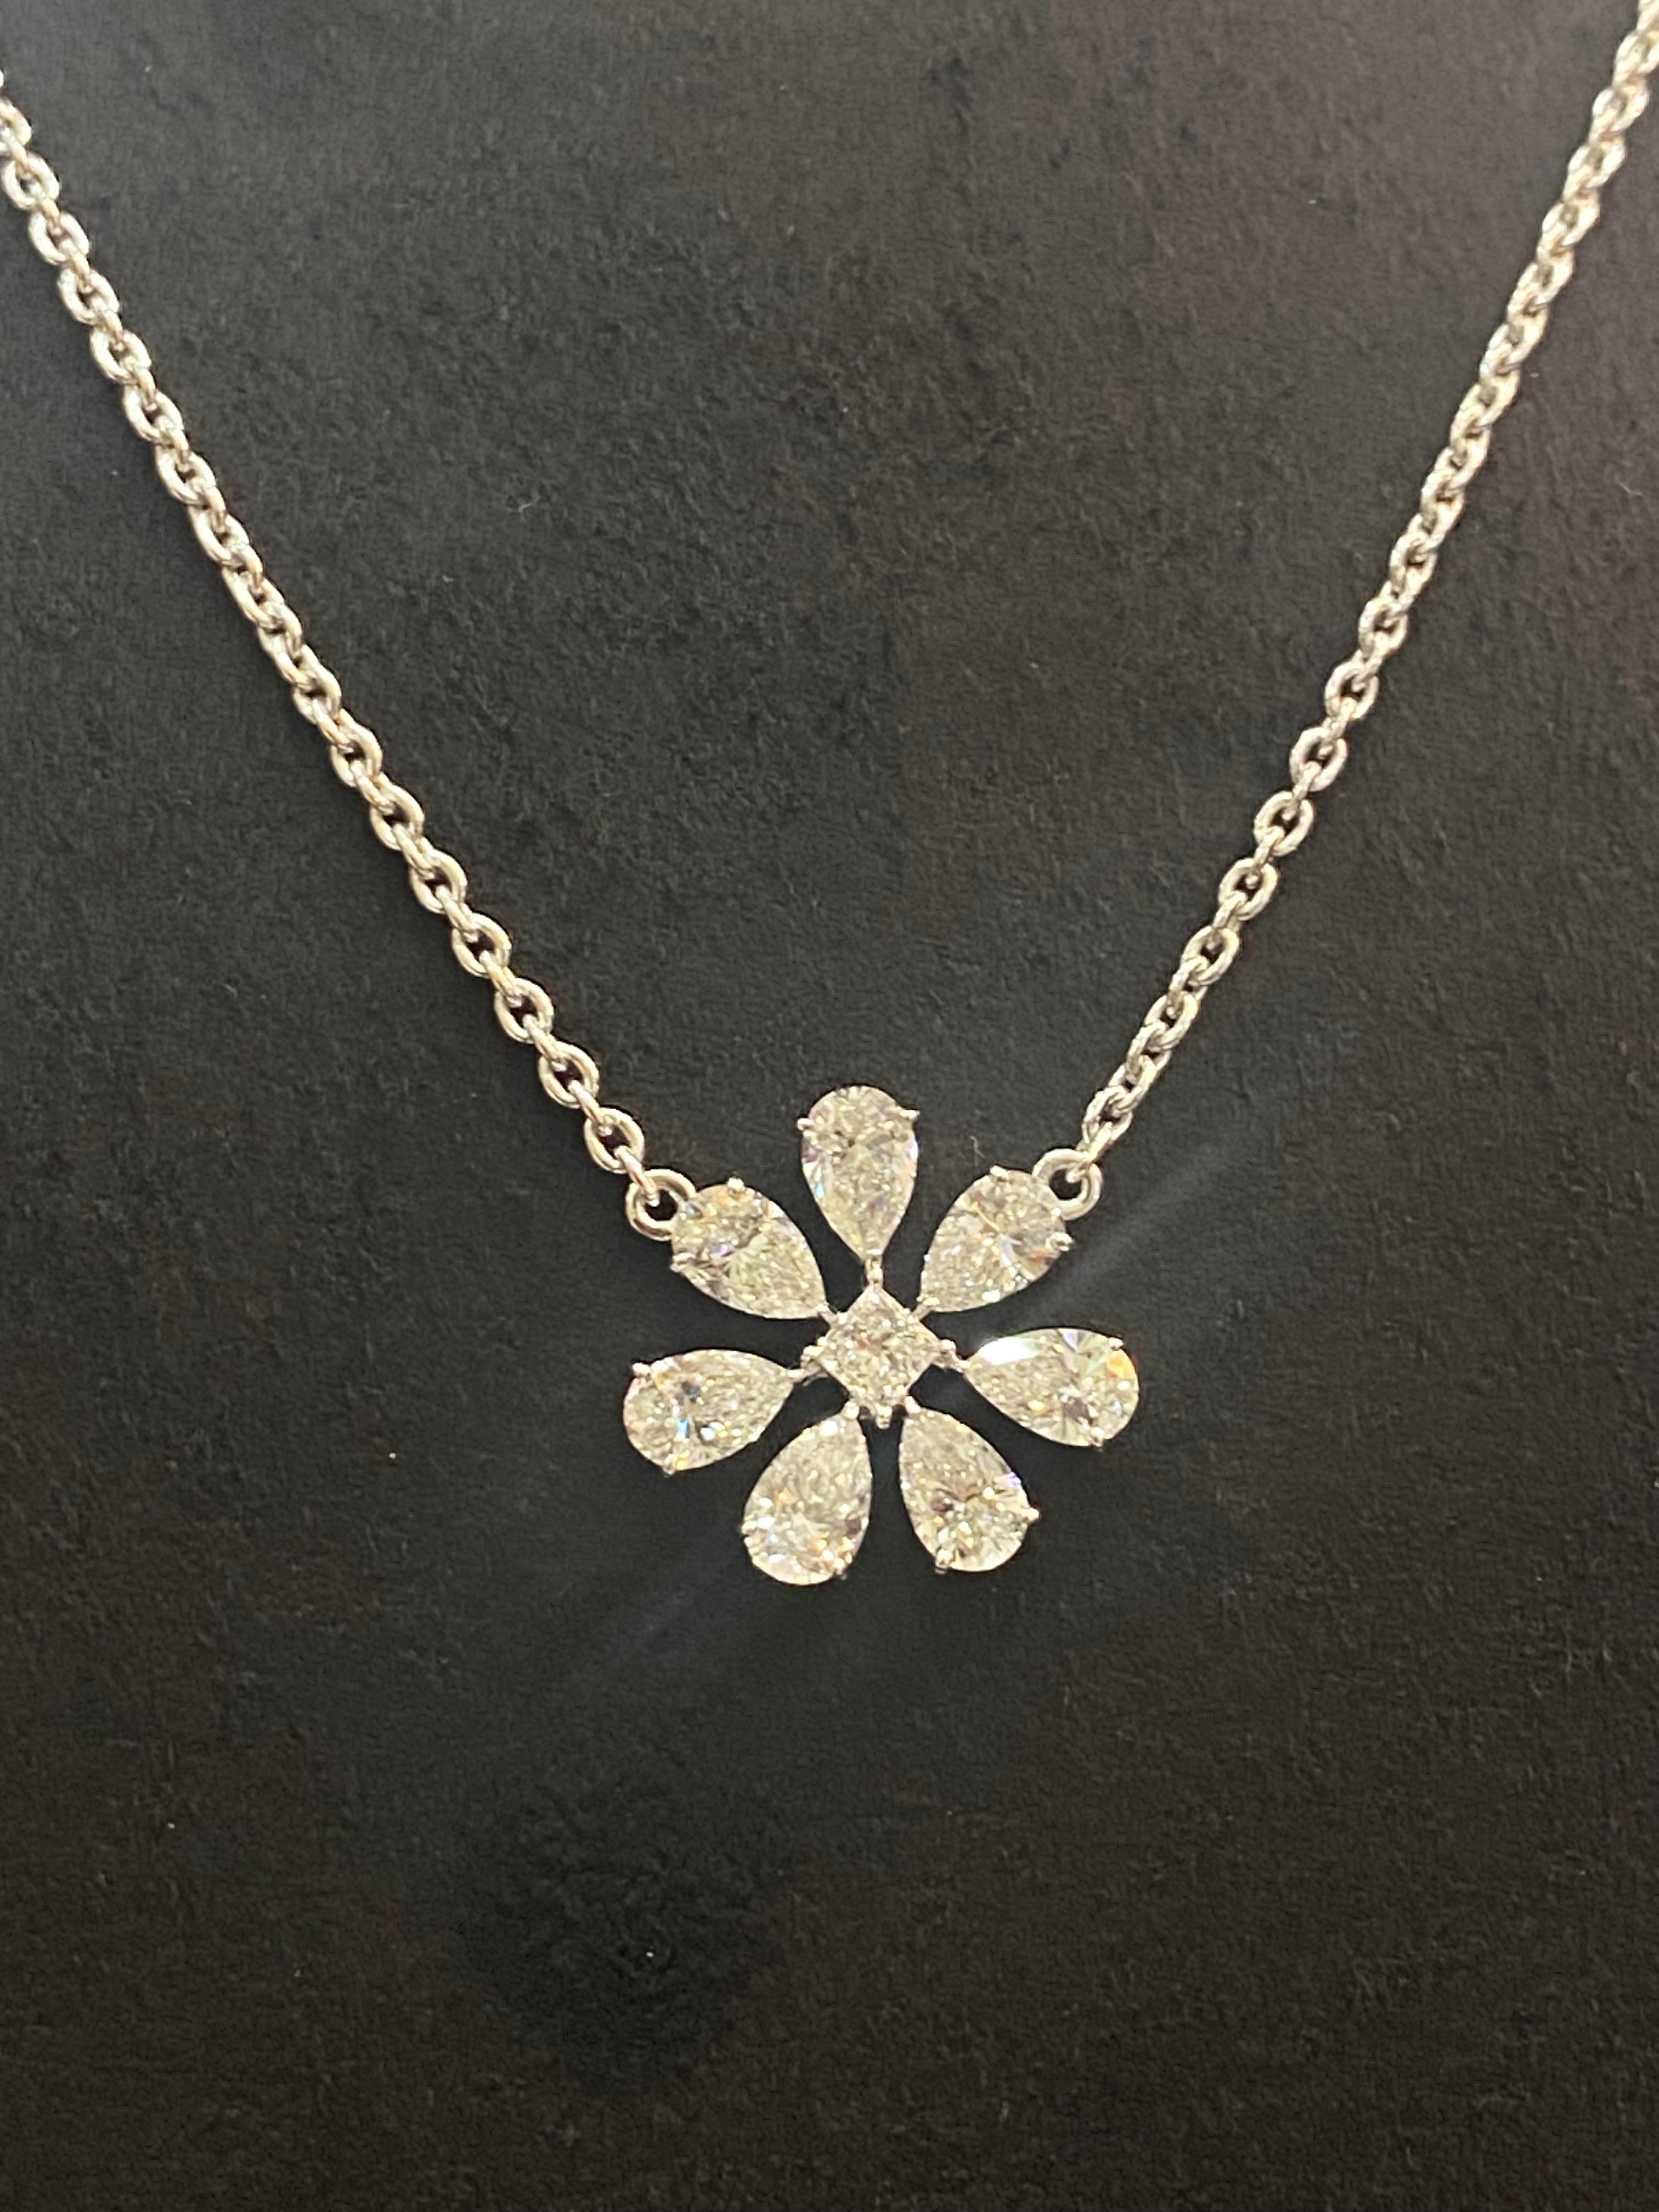 Embrace grace and share joy with this meticulously crafted 2.25 carat Pear Princess diamond flower necklace in 14k gold, promising flawless radiance and exquisite elegance!

Specifications : 

Diamond Weight : 2.25 Cts [2.10 Cts Pear + 0.15 Cts